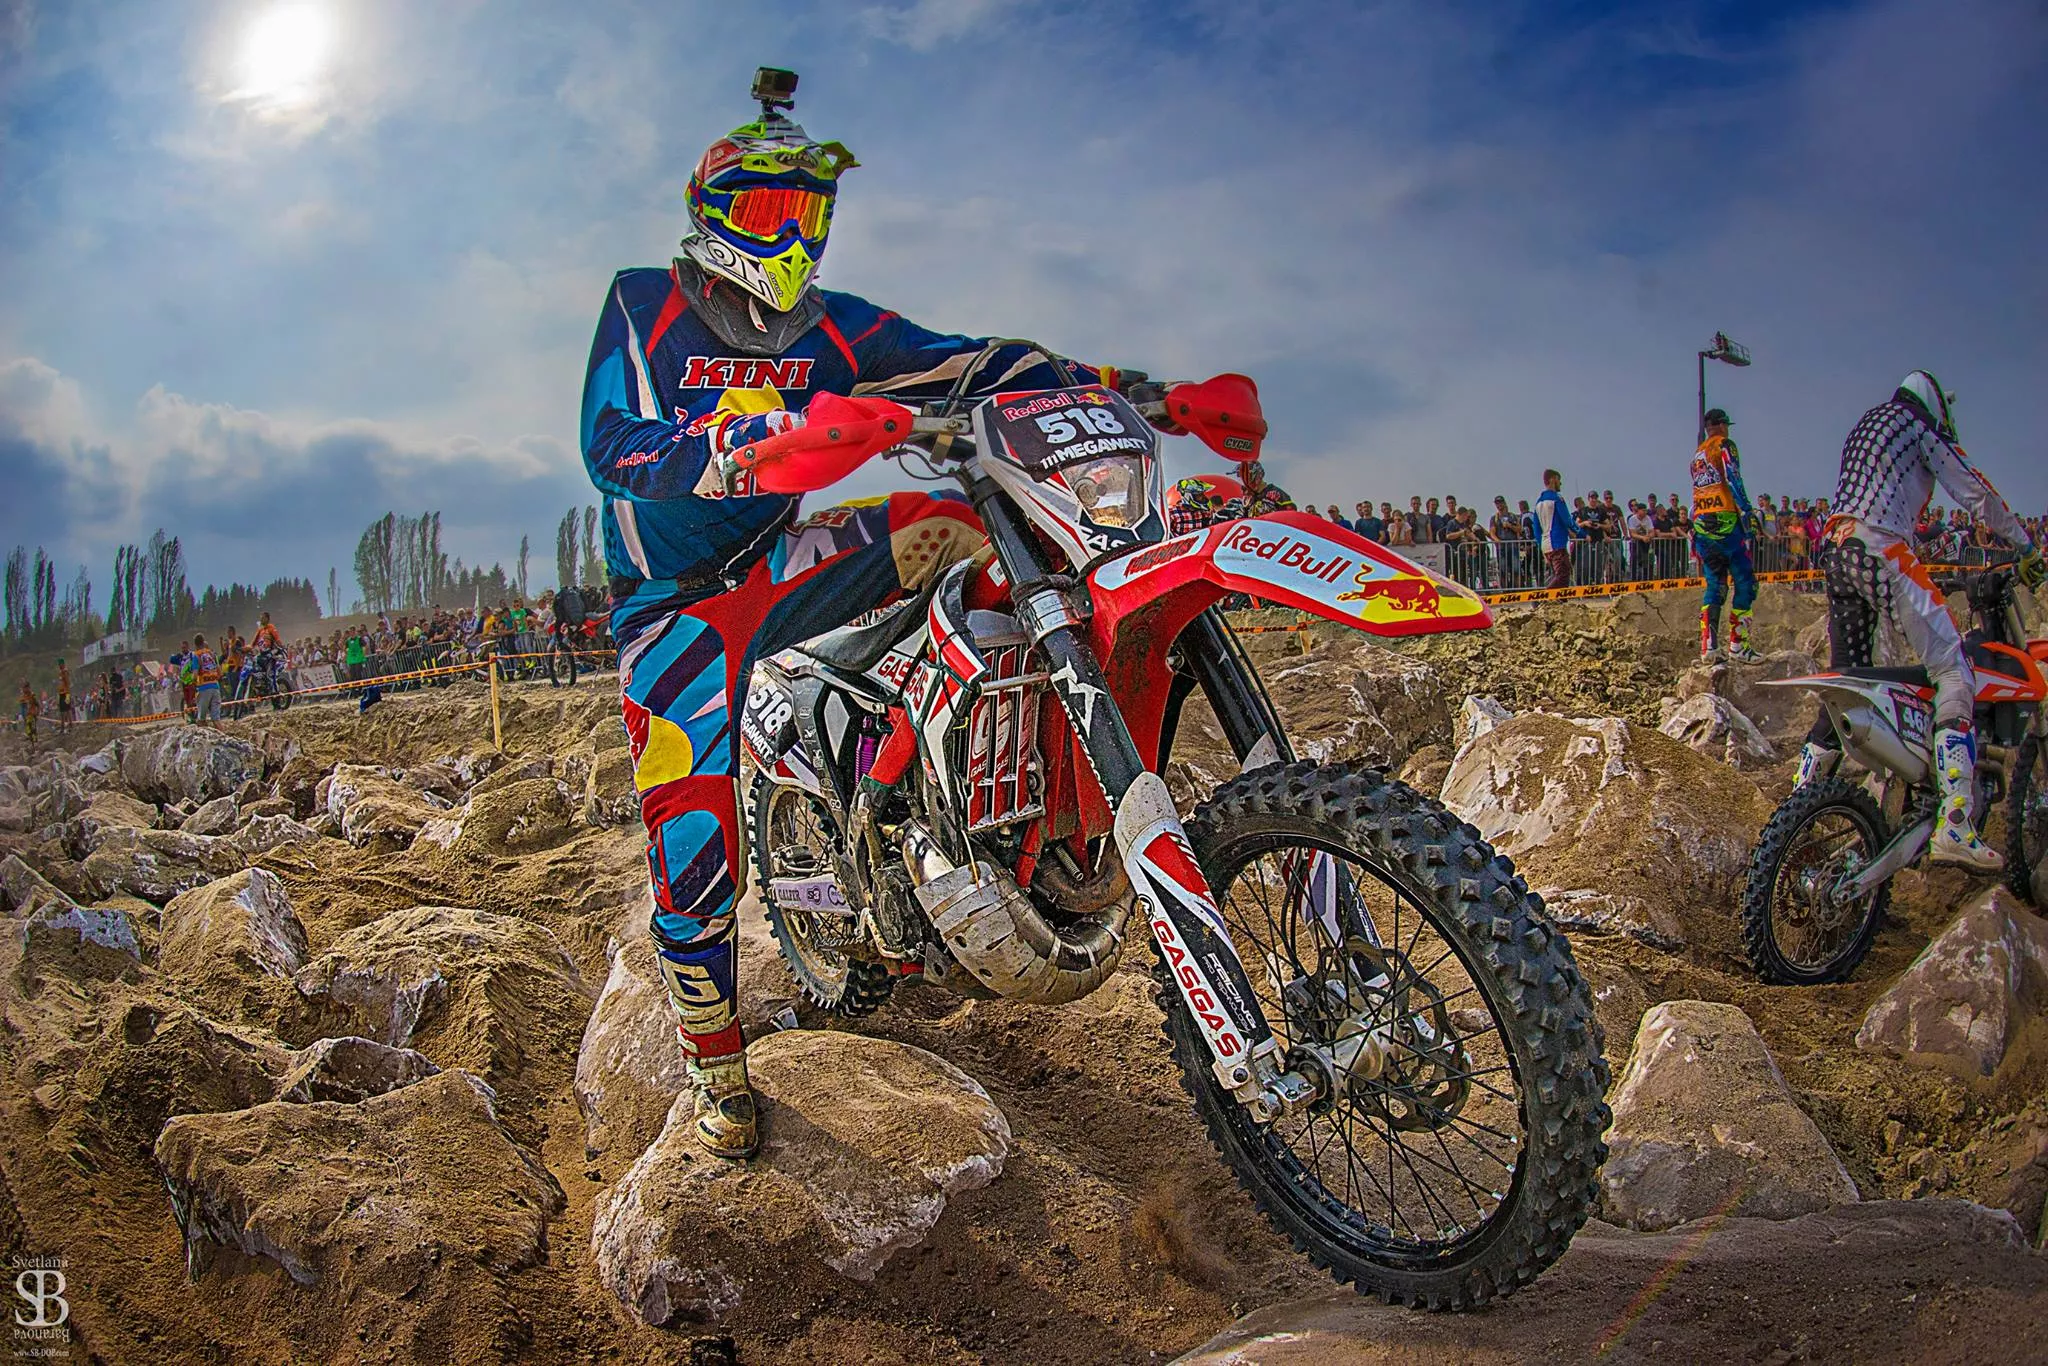 Louee Enduro and Motocross in Australia, Australia and Oceania | Motorcycles - Rated 1